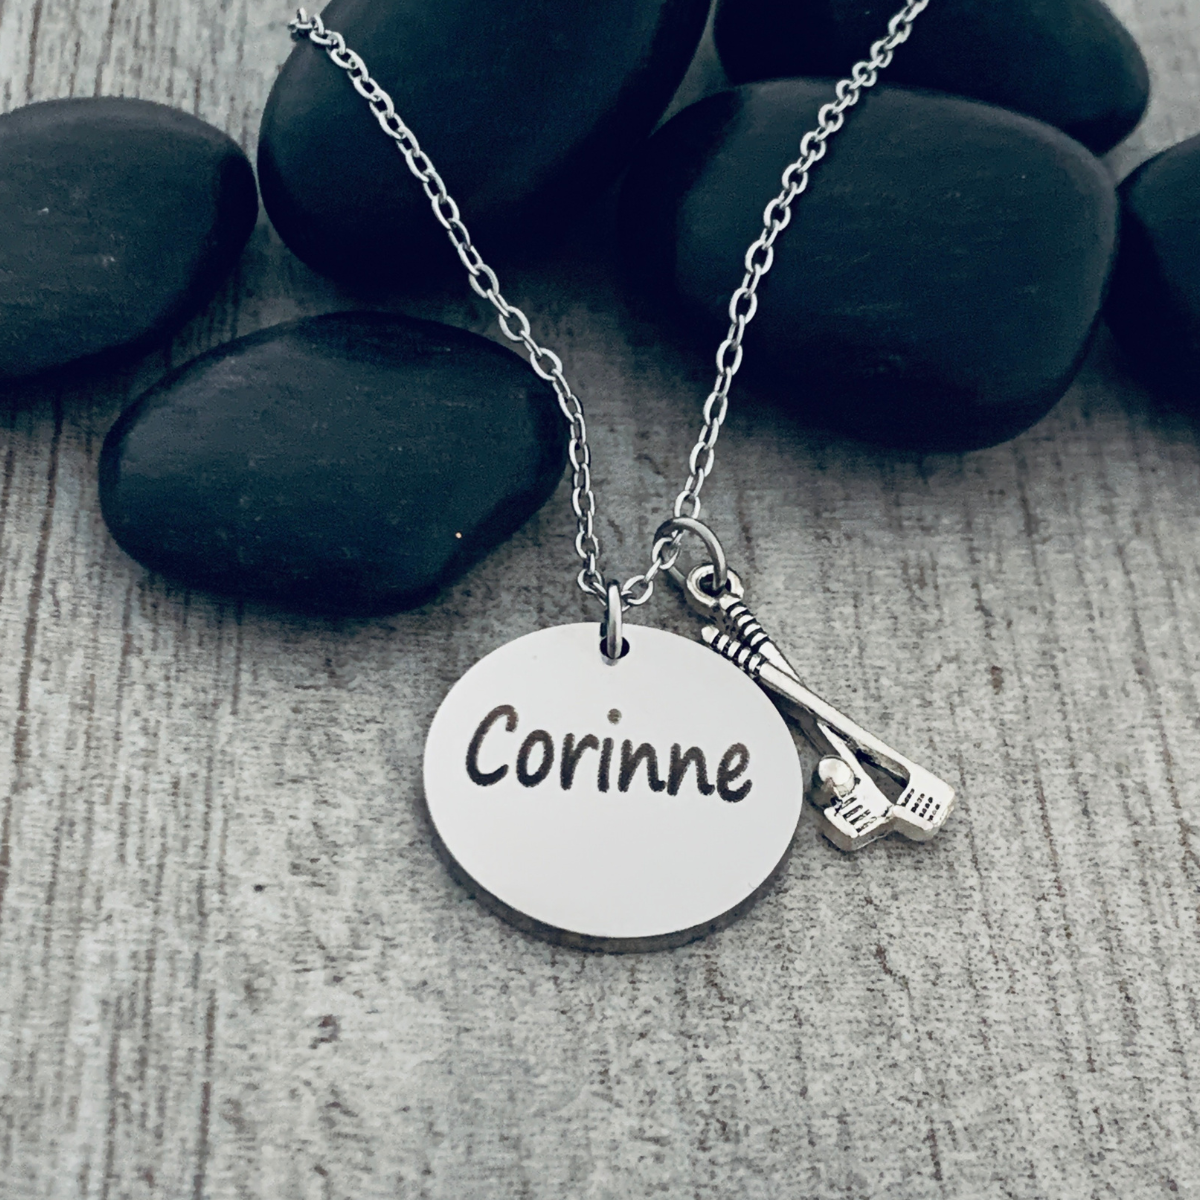 Personalized Engraved Golf Necklace